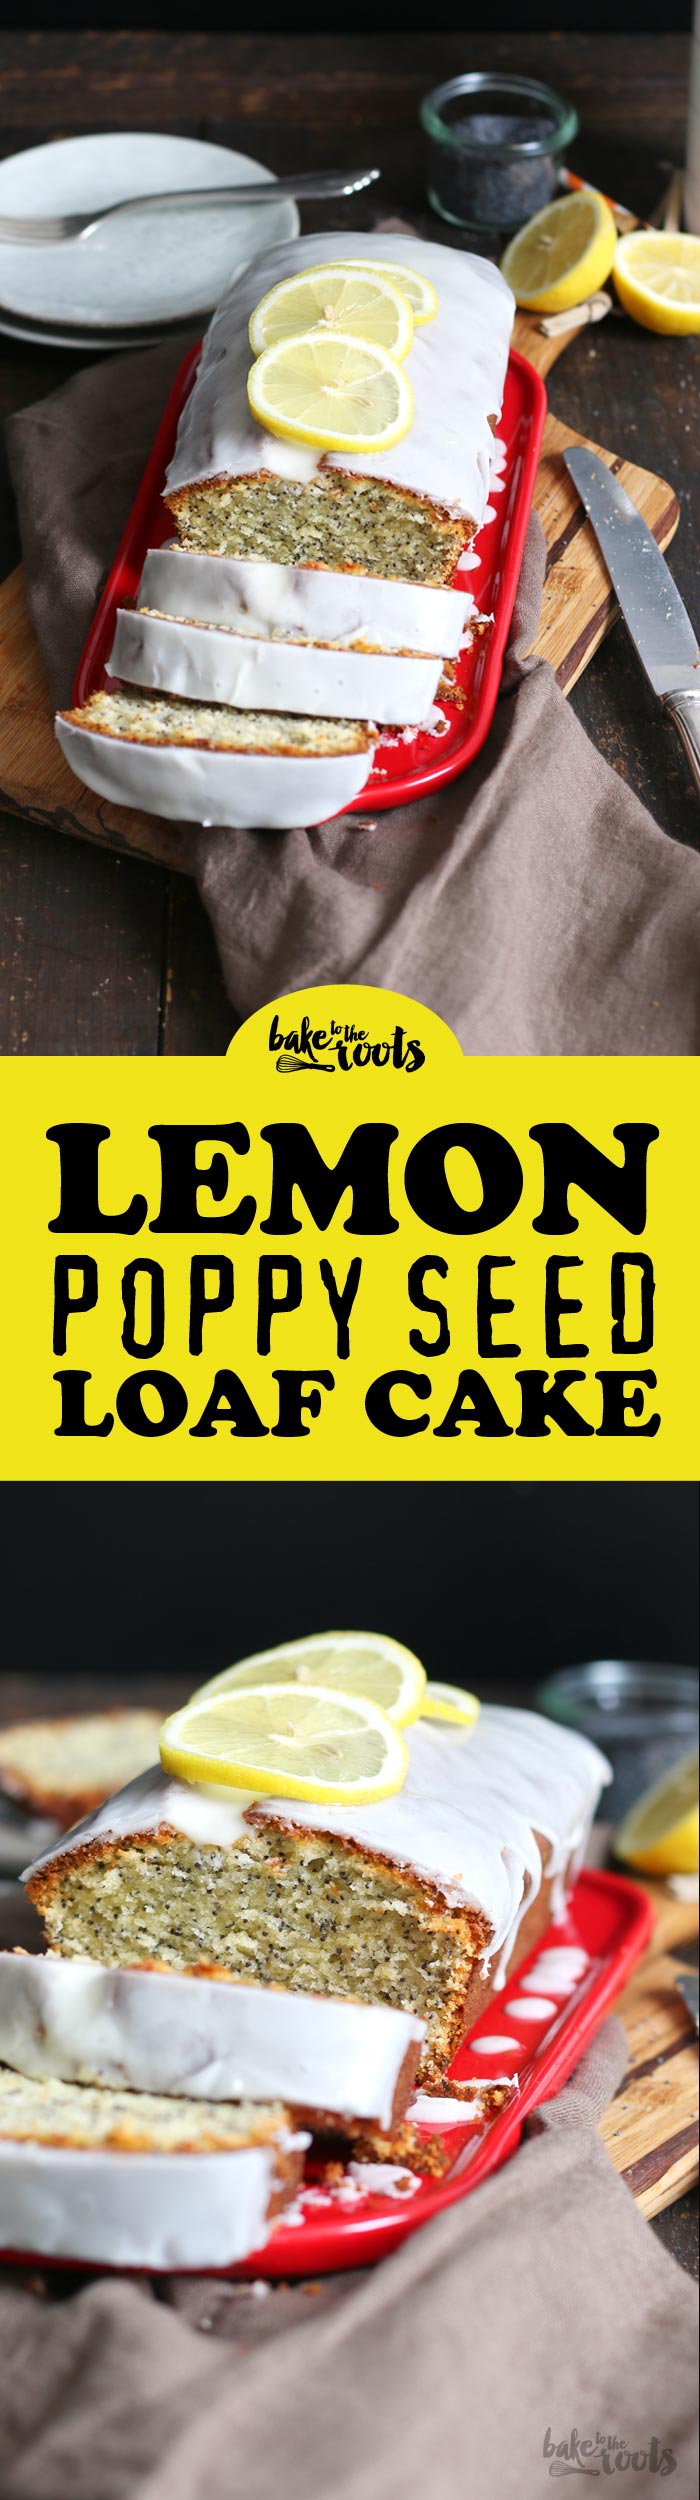 Delicious Loaf Cake with Lemons and Poppy Seed | Bake to the roots